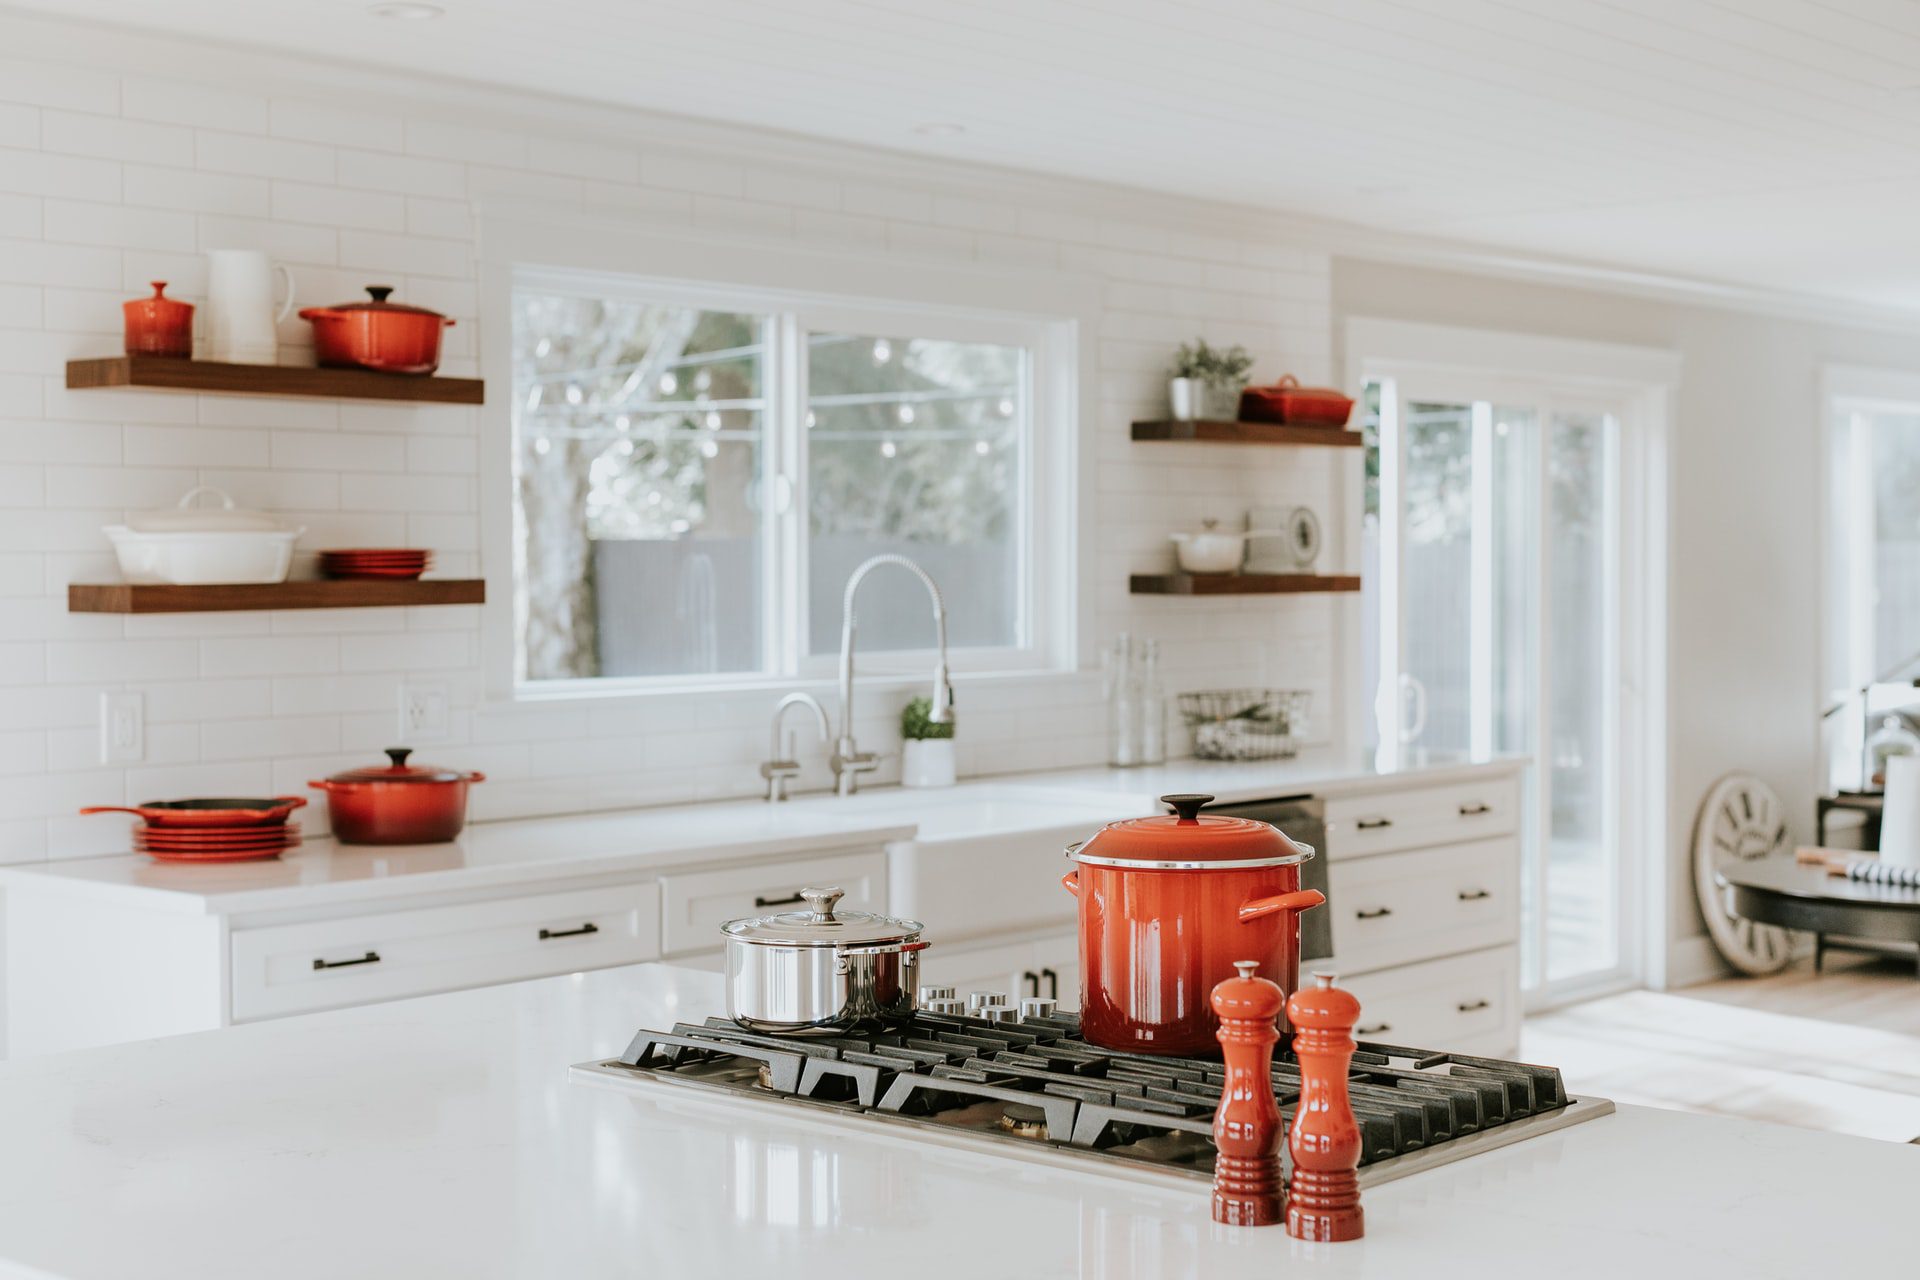 Importance of keeping the kitchen clean